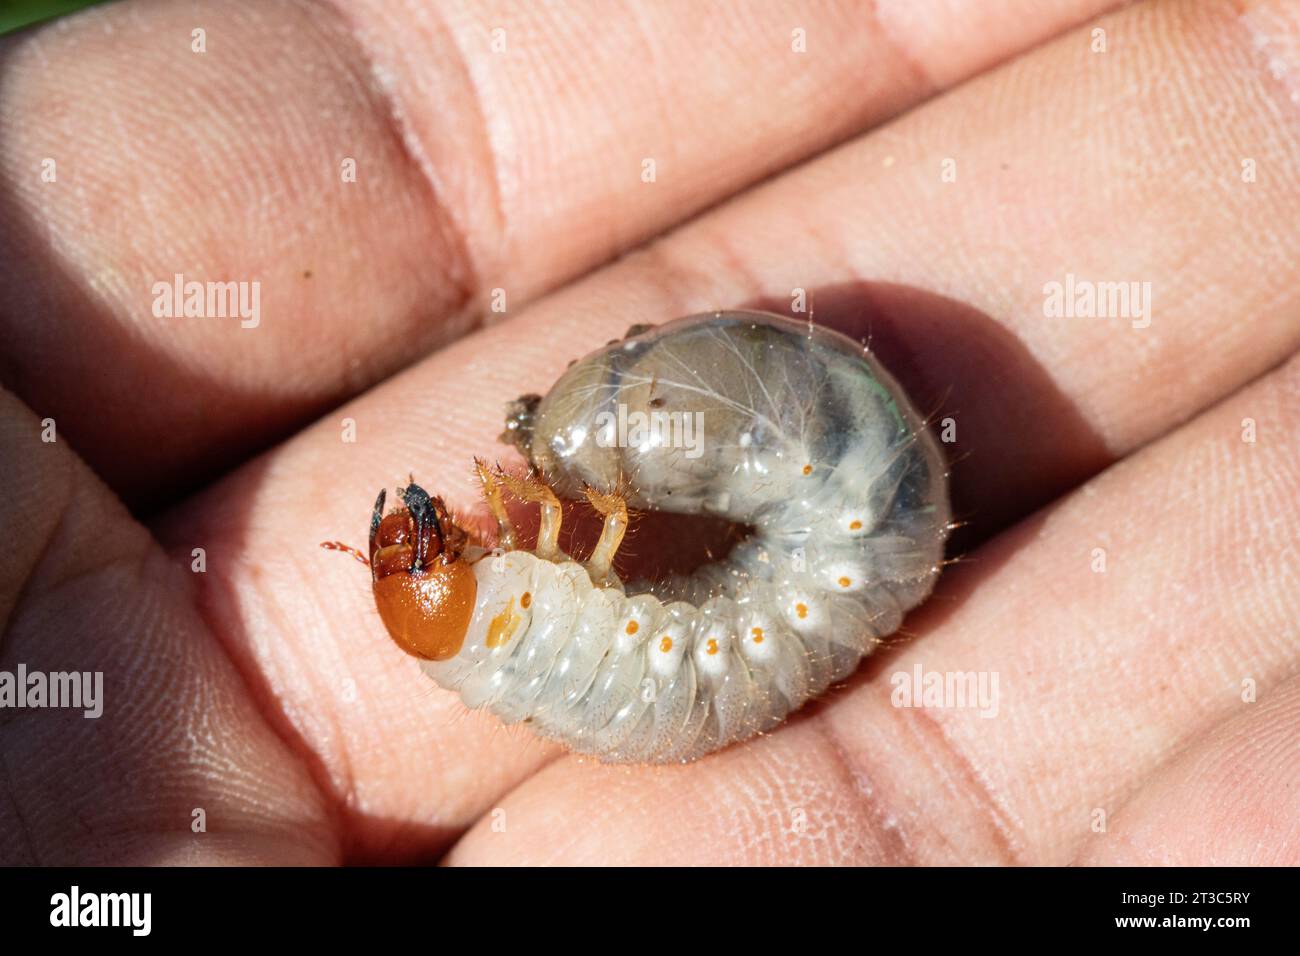 Closeup of the beetle larva, Melolontha melolontha, found in the soil on the palm of a farmer's hand. Parasite that eats roots, destroying plantations Stock Photo